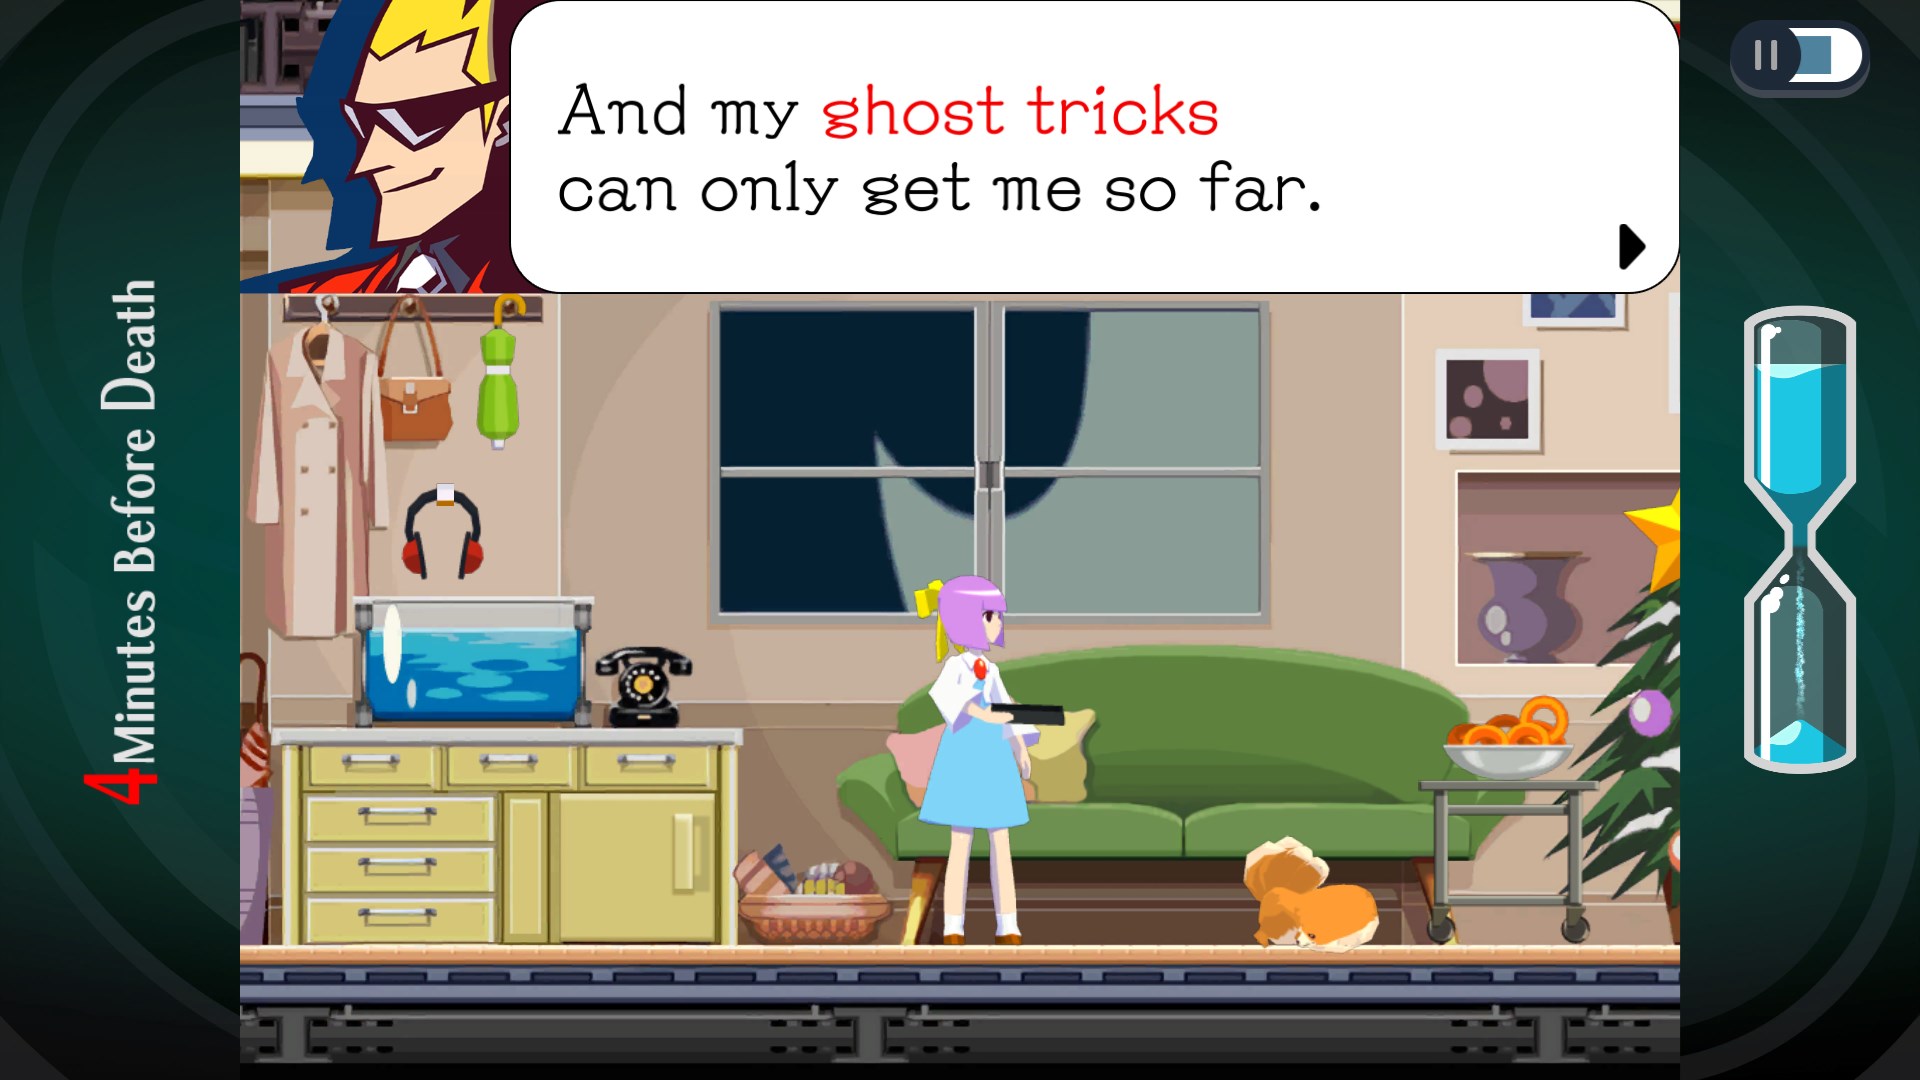 Ghost Trick: Phantom Detective screenshot of protagonist Sissel commenting that his ghost tricks can only get him so far